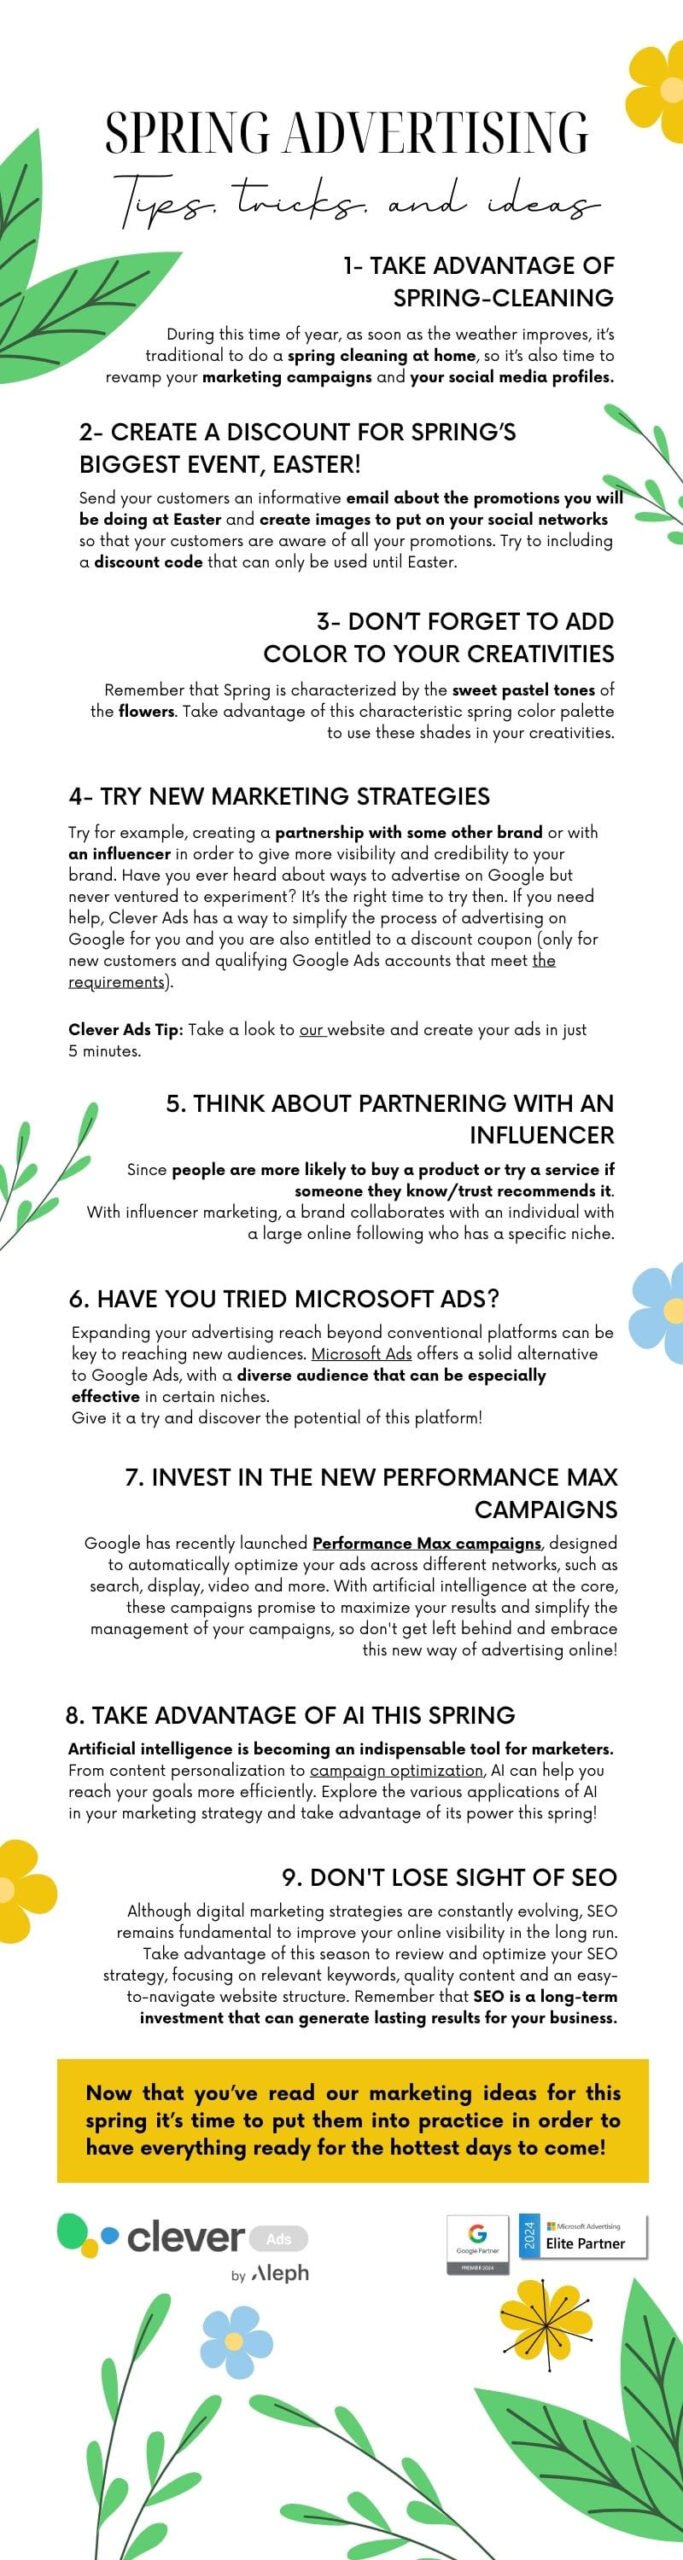 spring advertising infographic